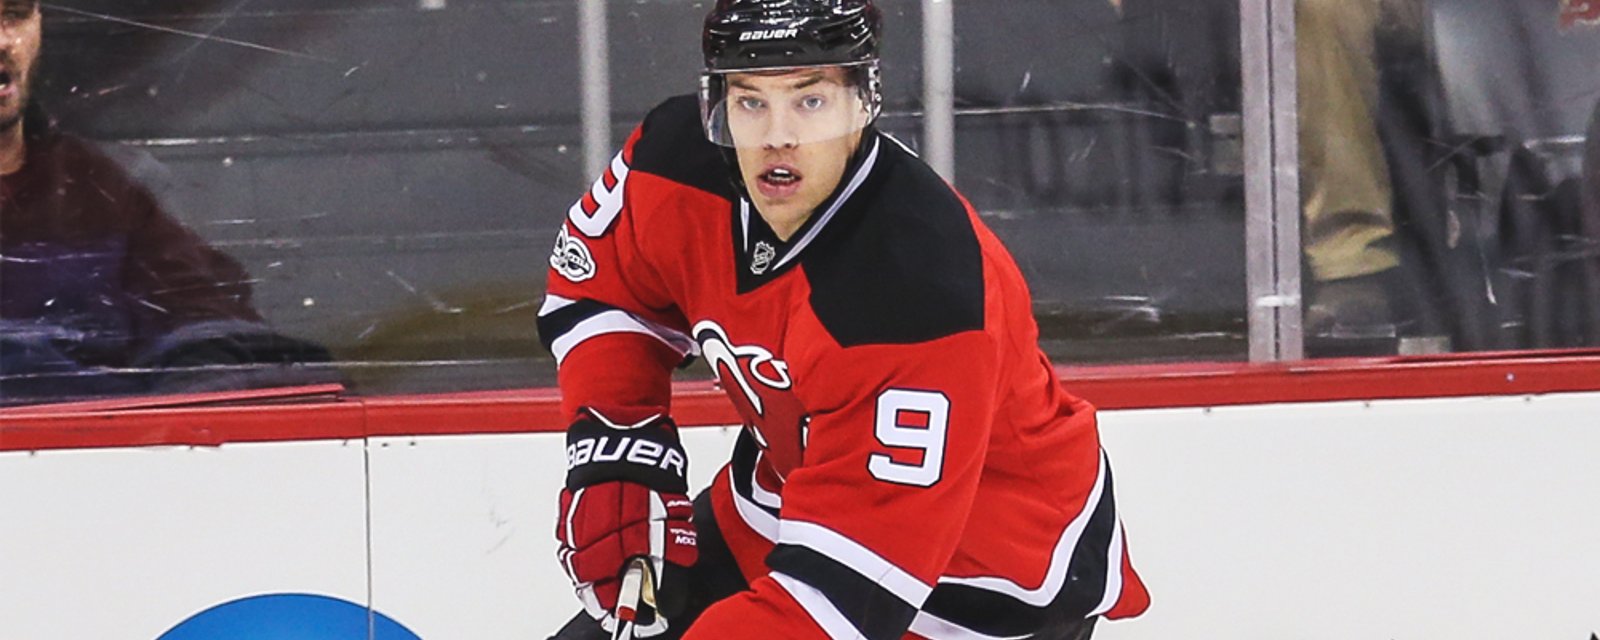 A bitter Taylor Hall makes shocking comments regarding his former team.